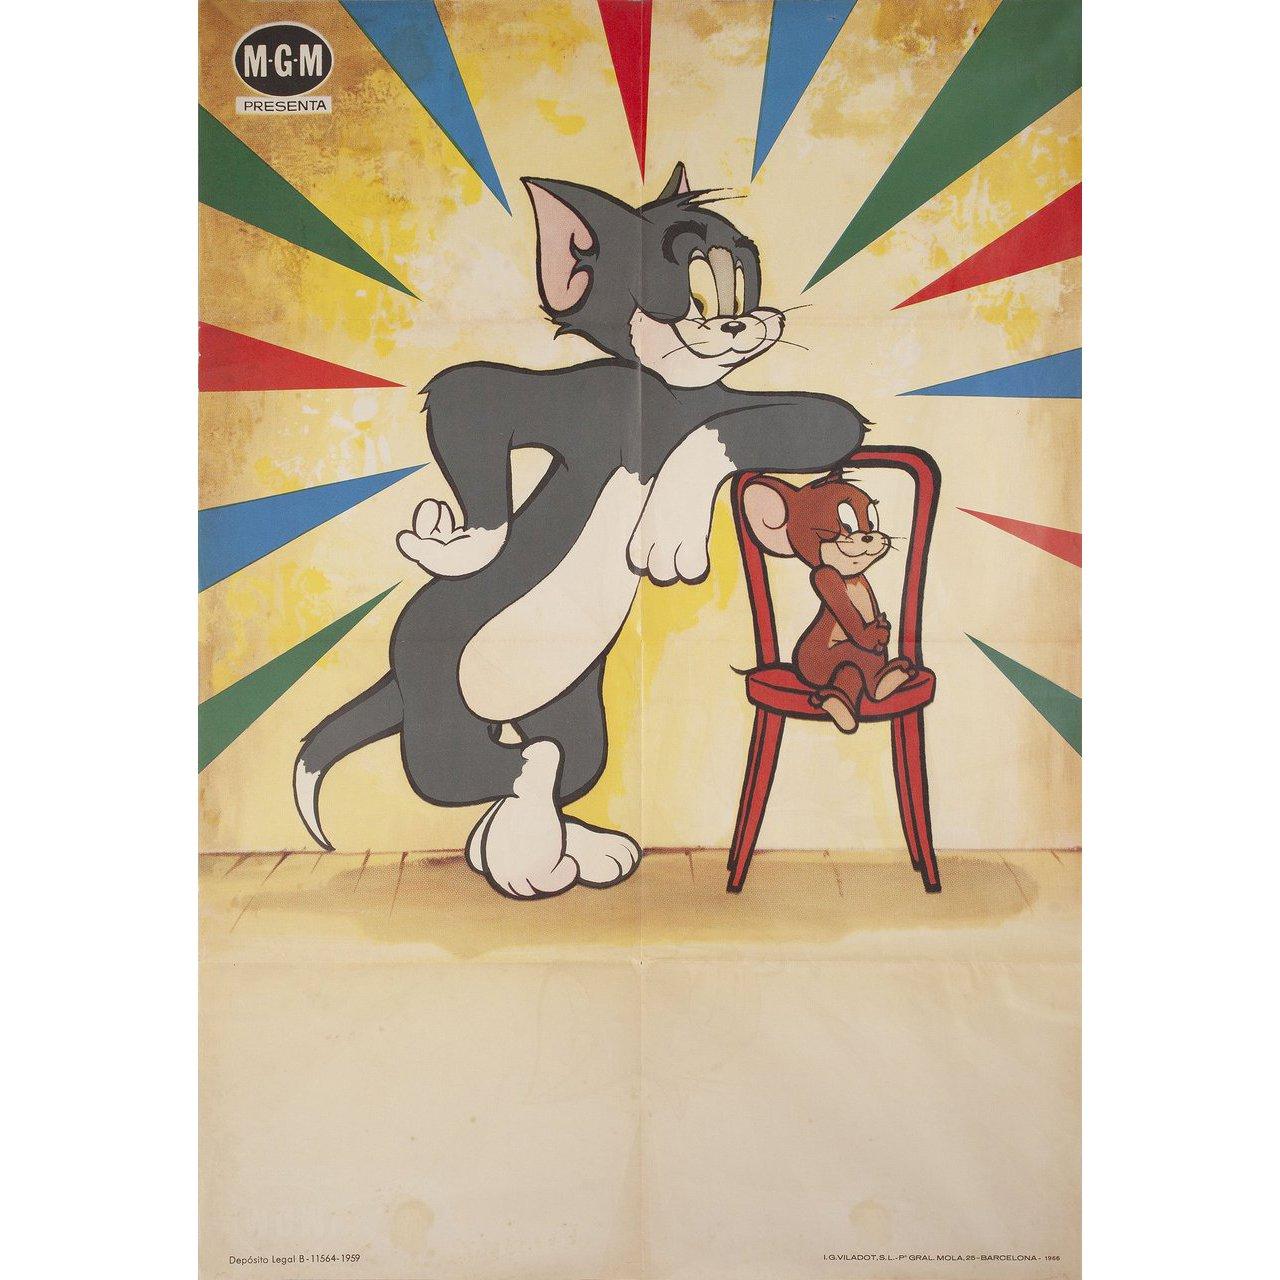 Original 1966 Spanish B1 poster for the 1940s film Tom and Jerry. Very good-fine condition, folded with minor bleed through in the top left. Many original posters were issued folded or were subsequently folded. Please note: the size is stated in